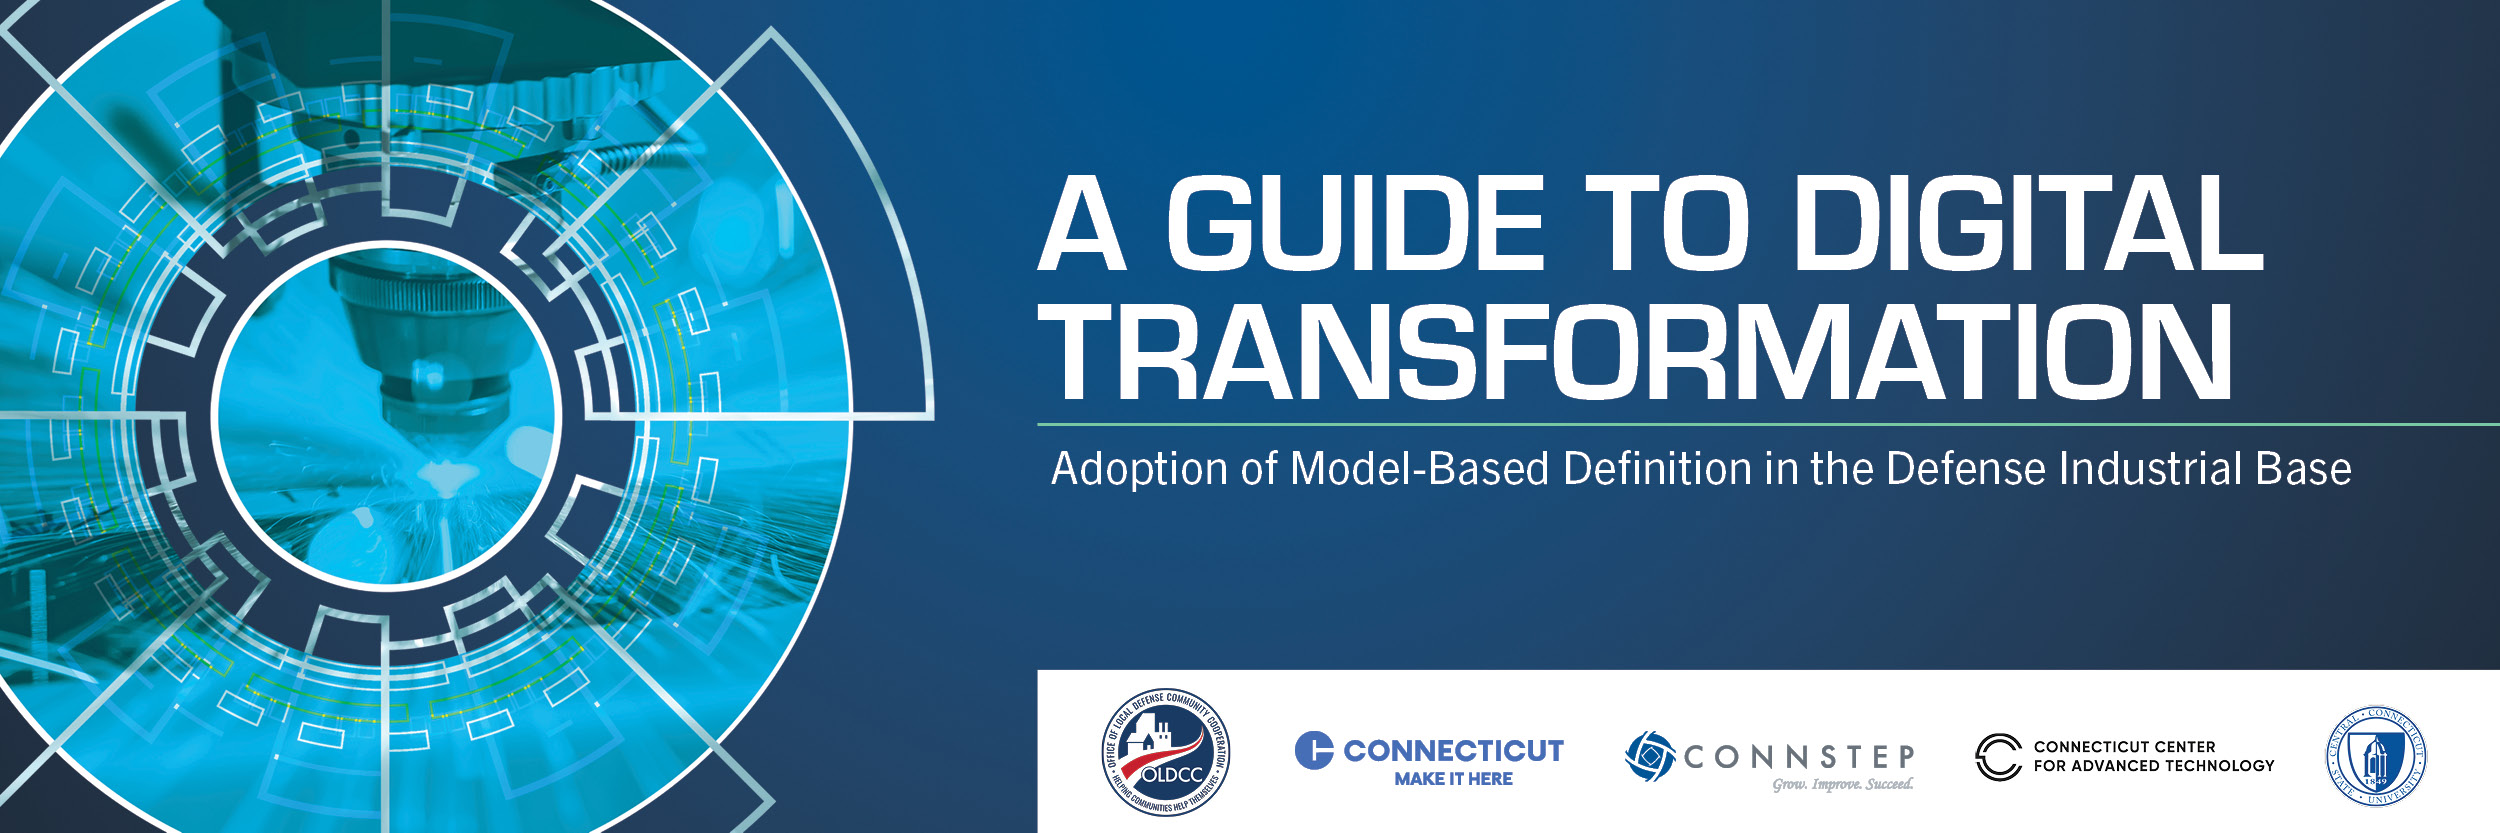 A Guide to Digital Transformation Hosted by Central Connecticut State University